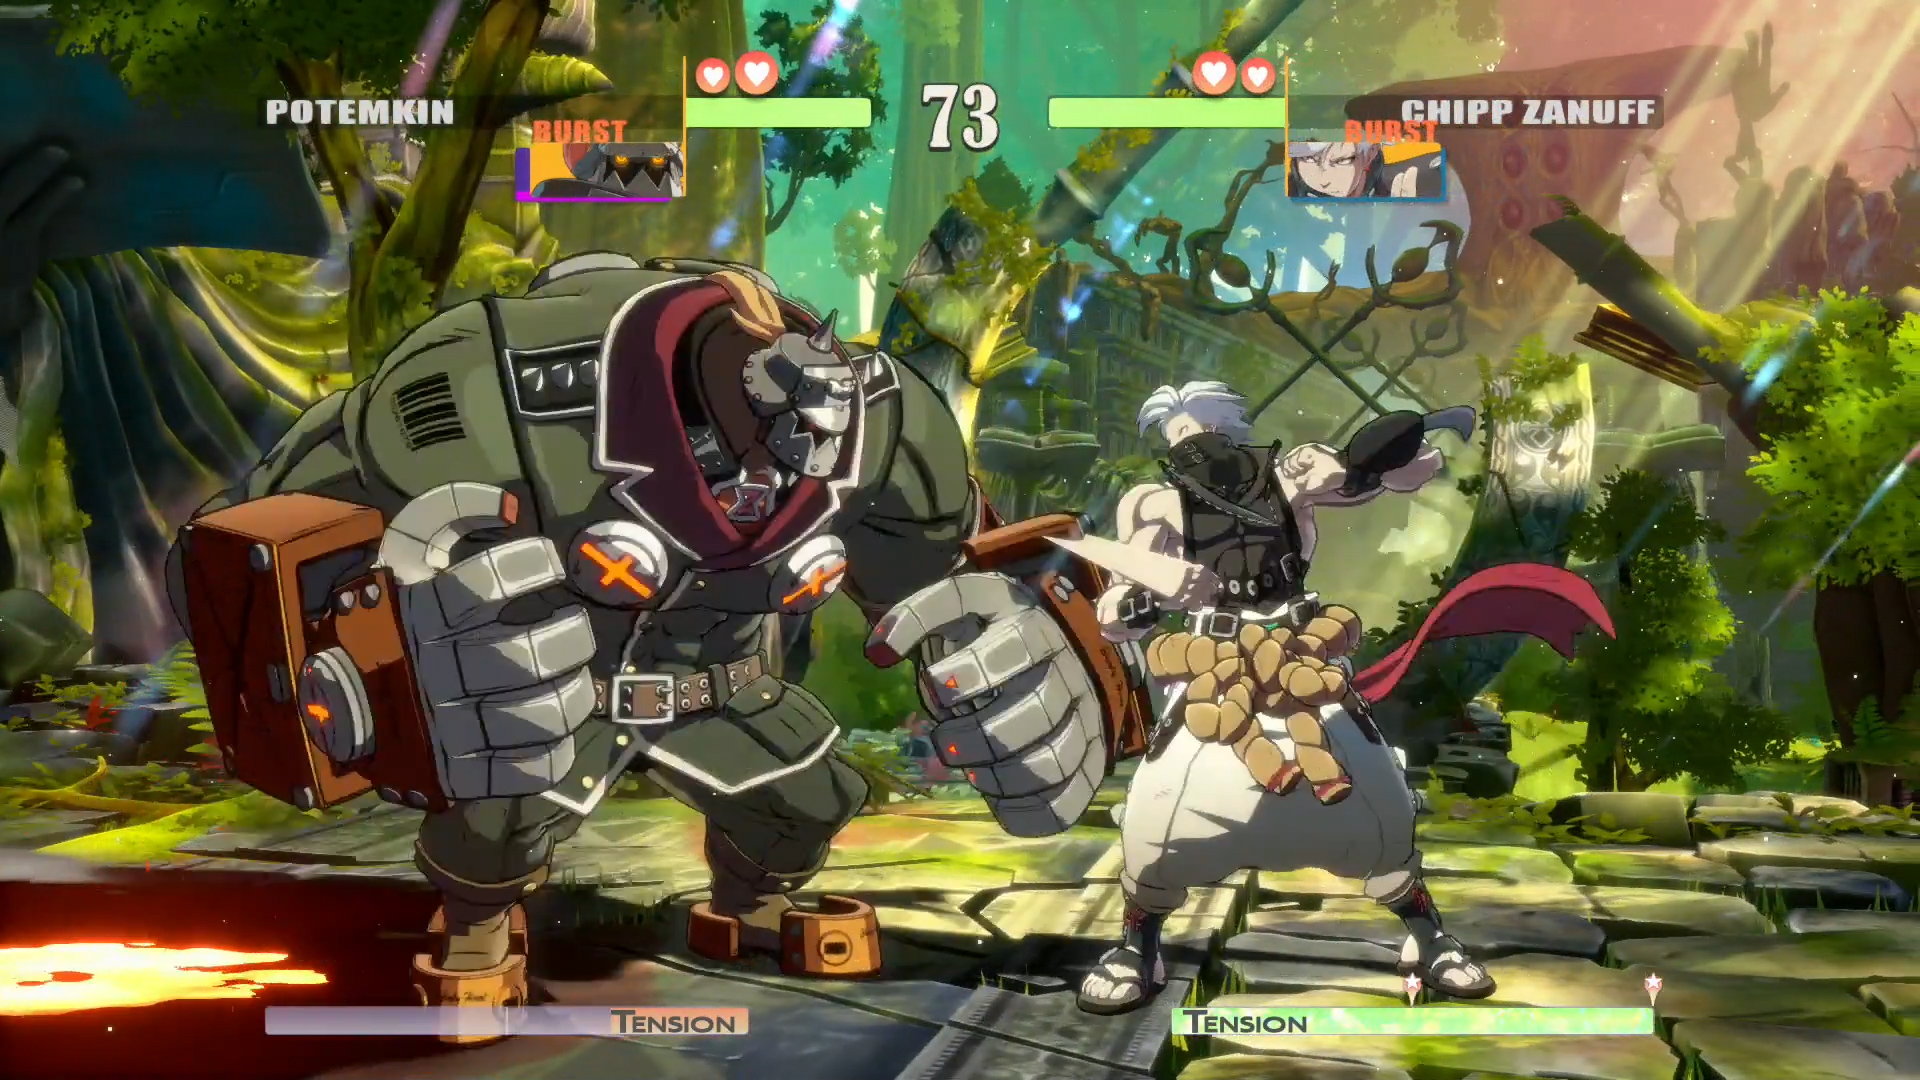 Chipp and Potemkin revealed as the latest additions to Guilty Gear roster